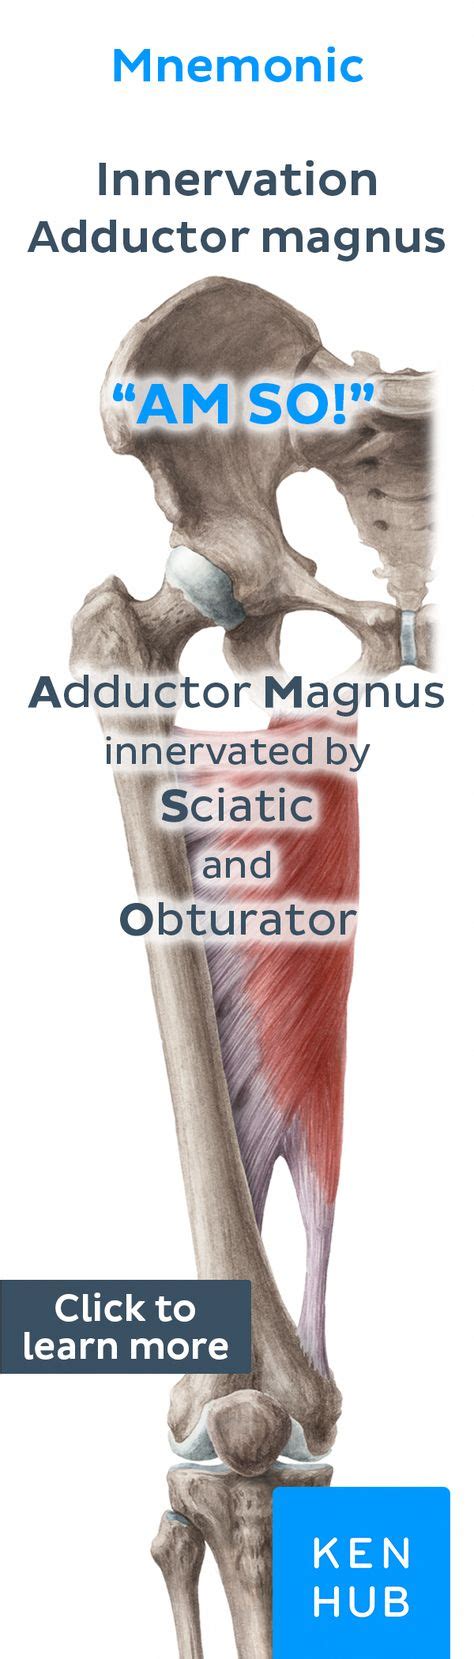 Hip Adductors With Images Physical Therapy Babe Anatomy And